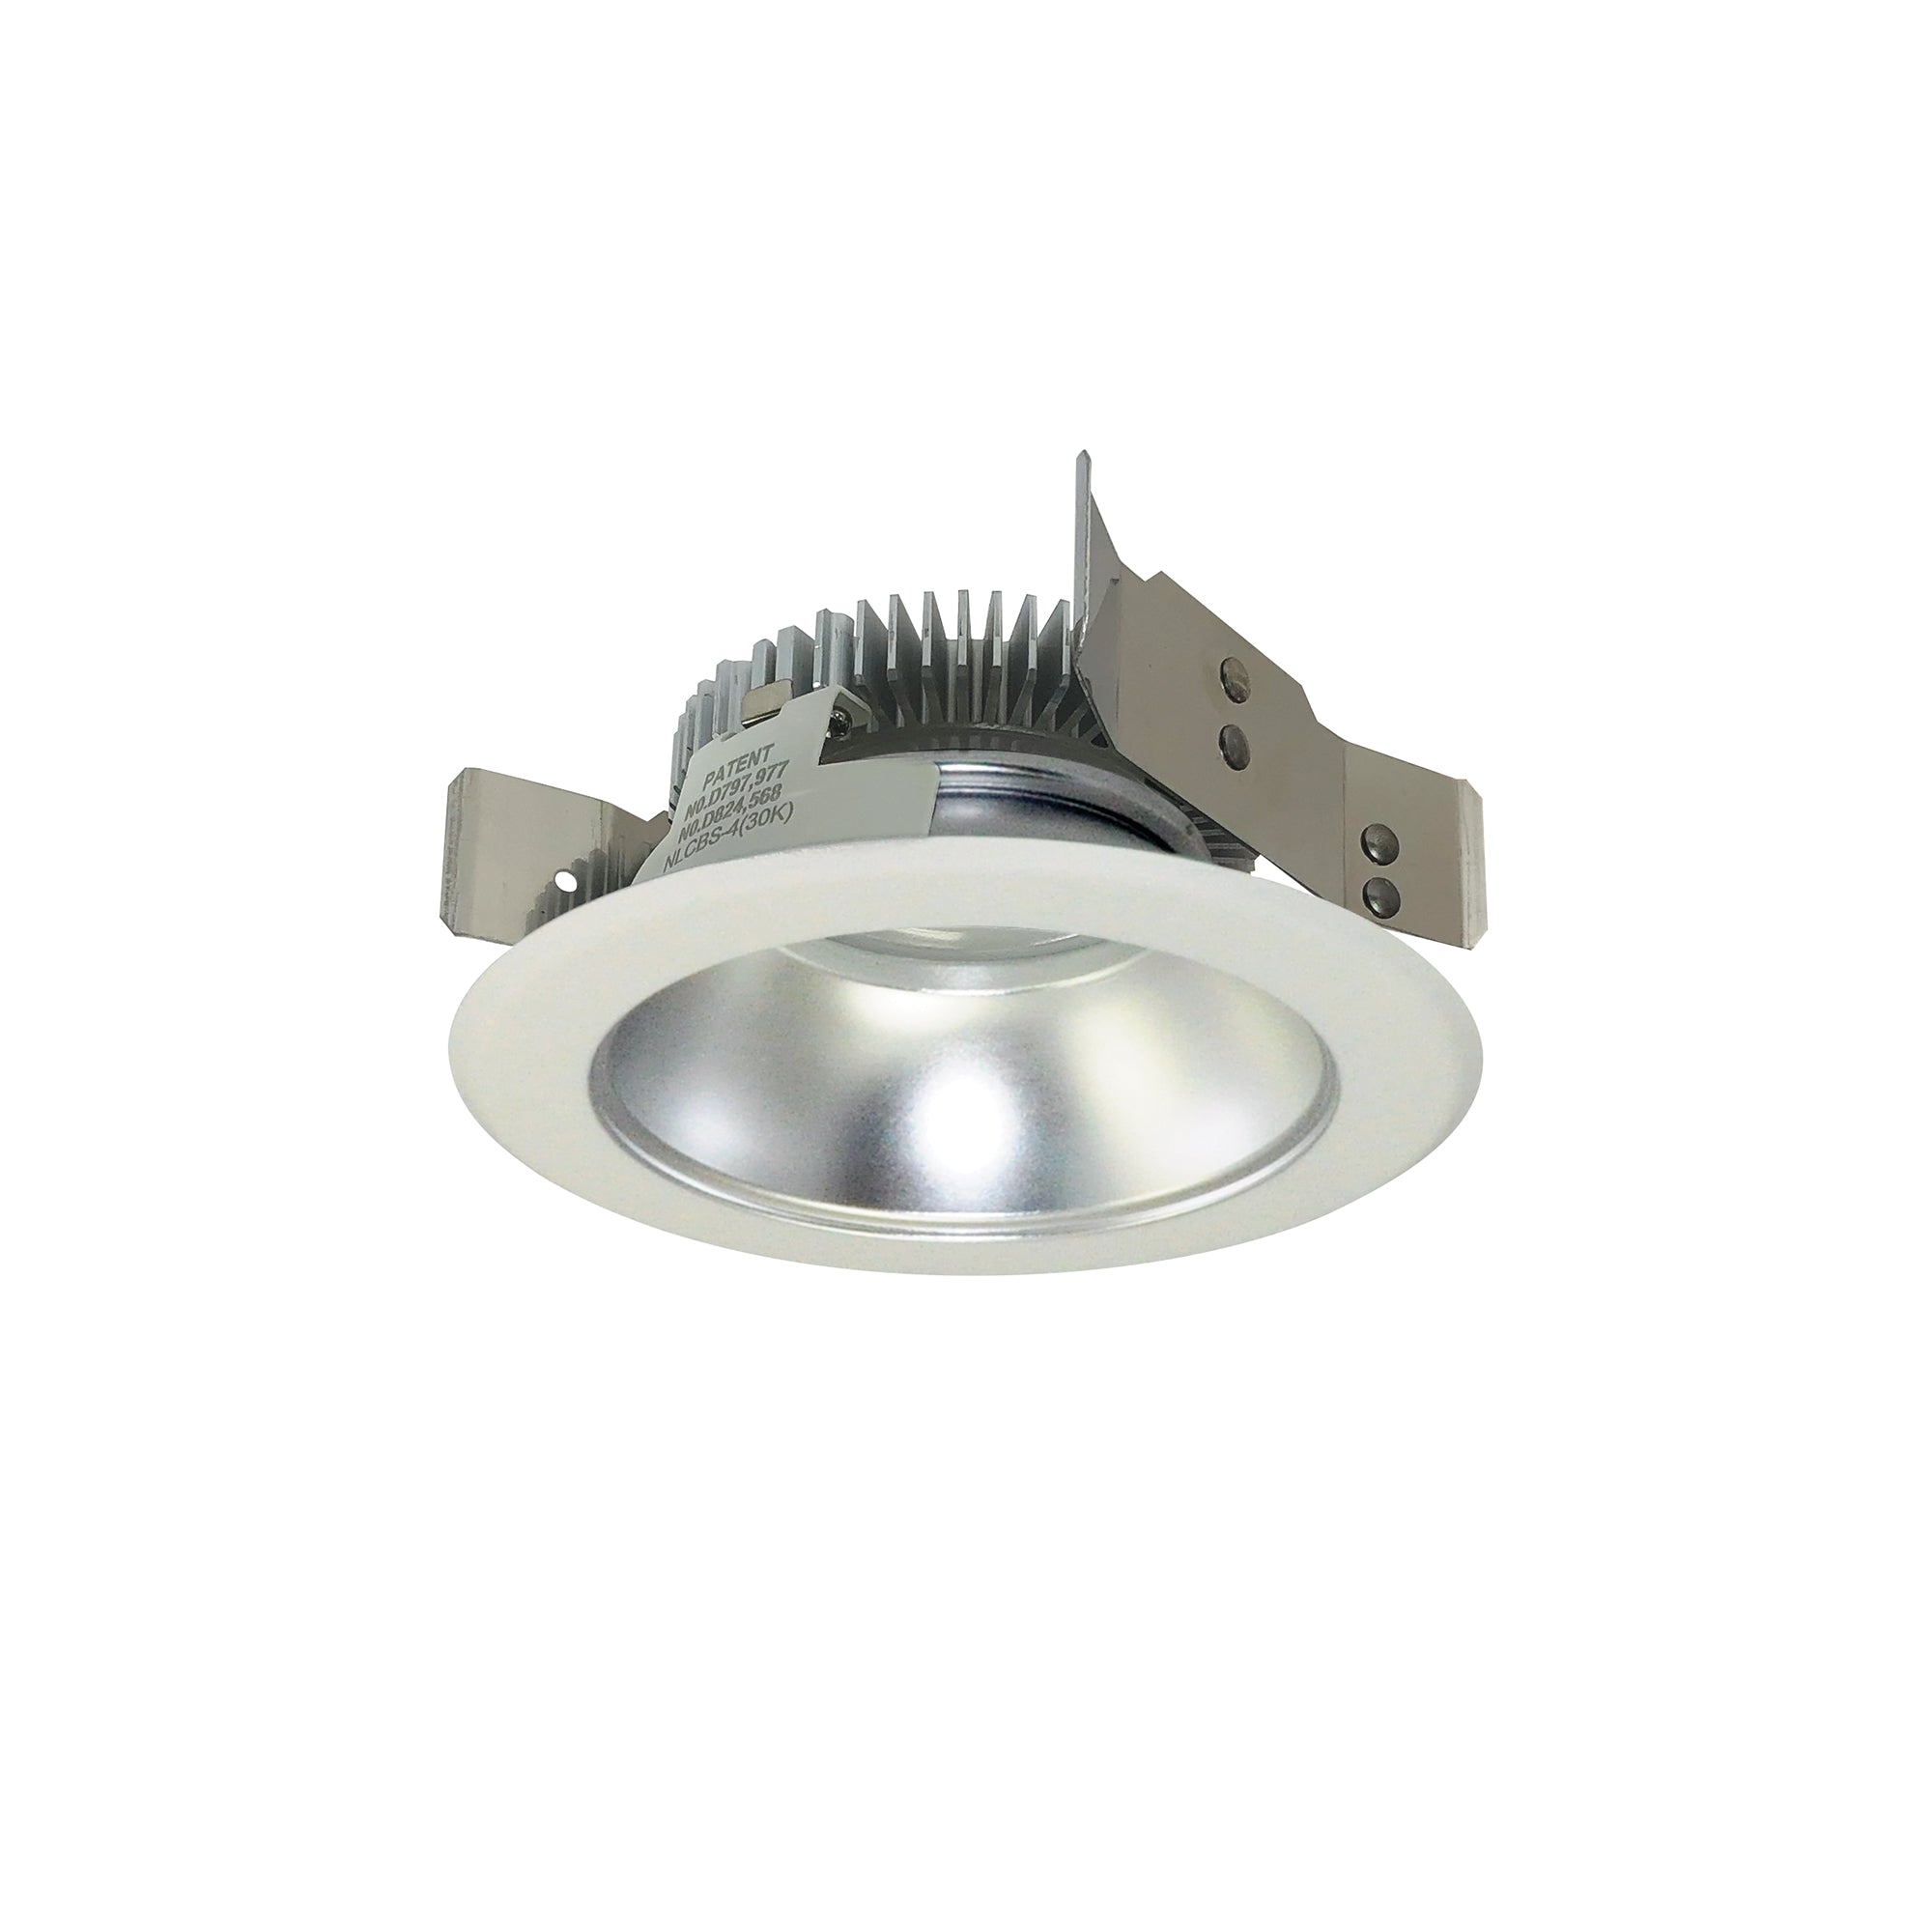 Nora Lighting NLCBS-4W518540DMPW - Recessed - 4 Inch Cobalt Shallow High Lumen LED Trim, Round Reflector, 850lm, 4000K, Diffused/MPW